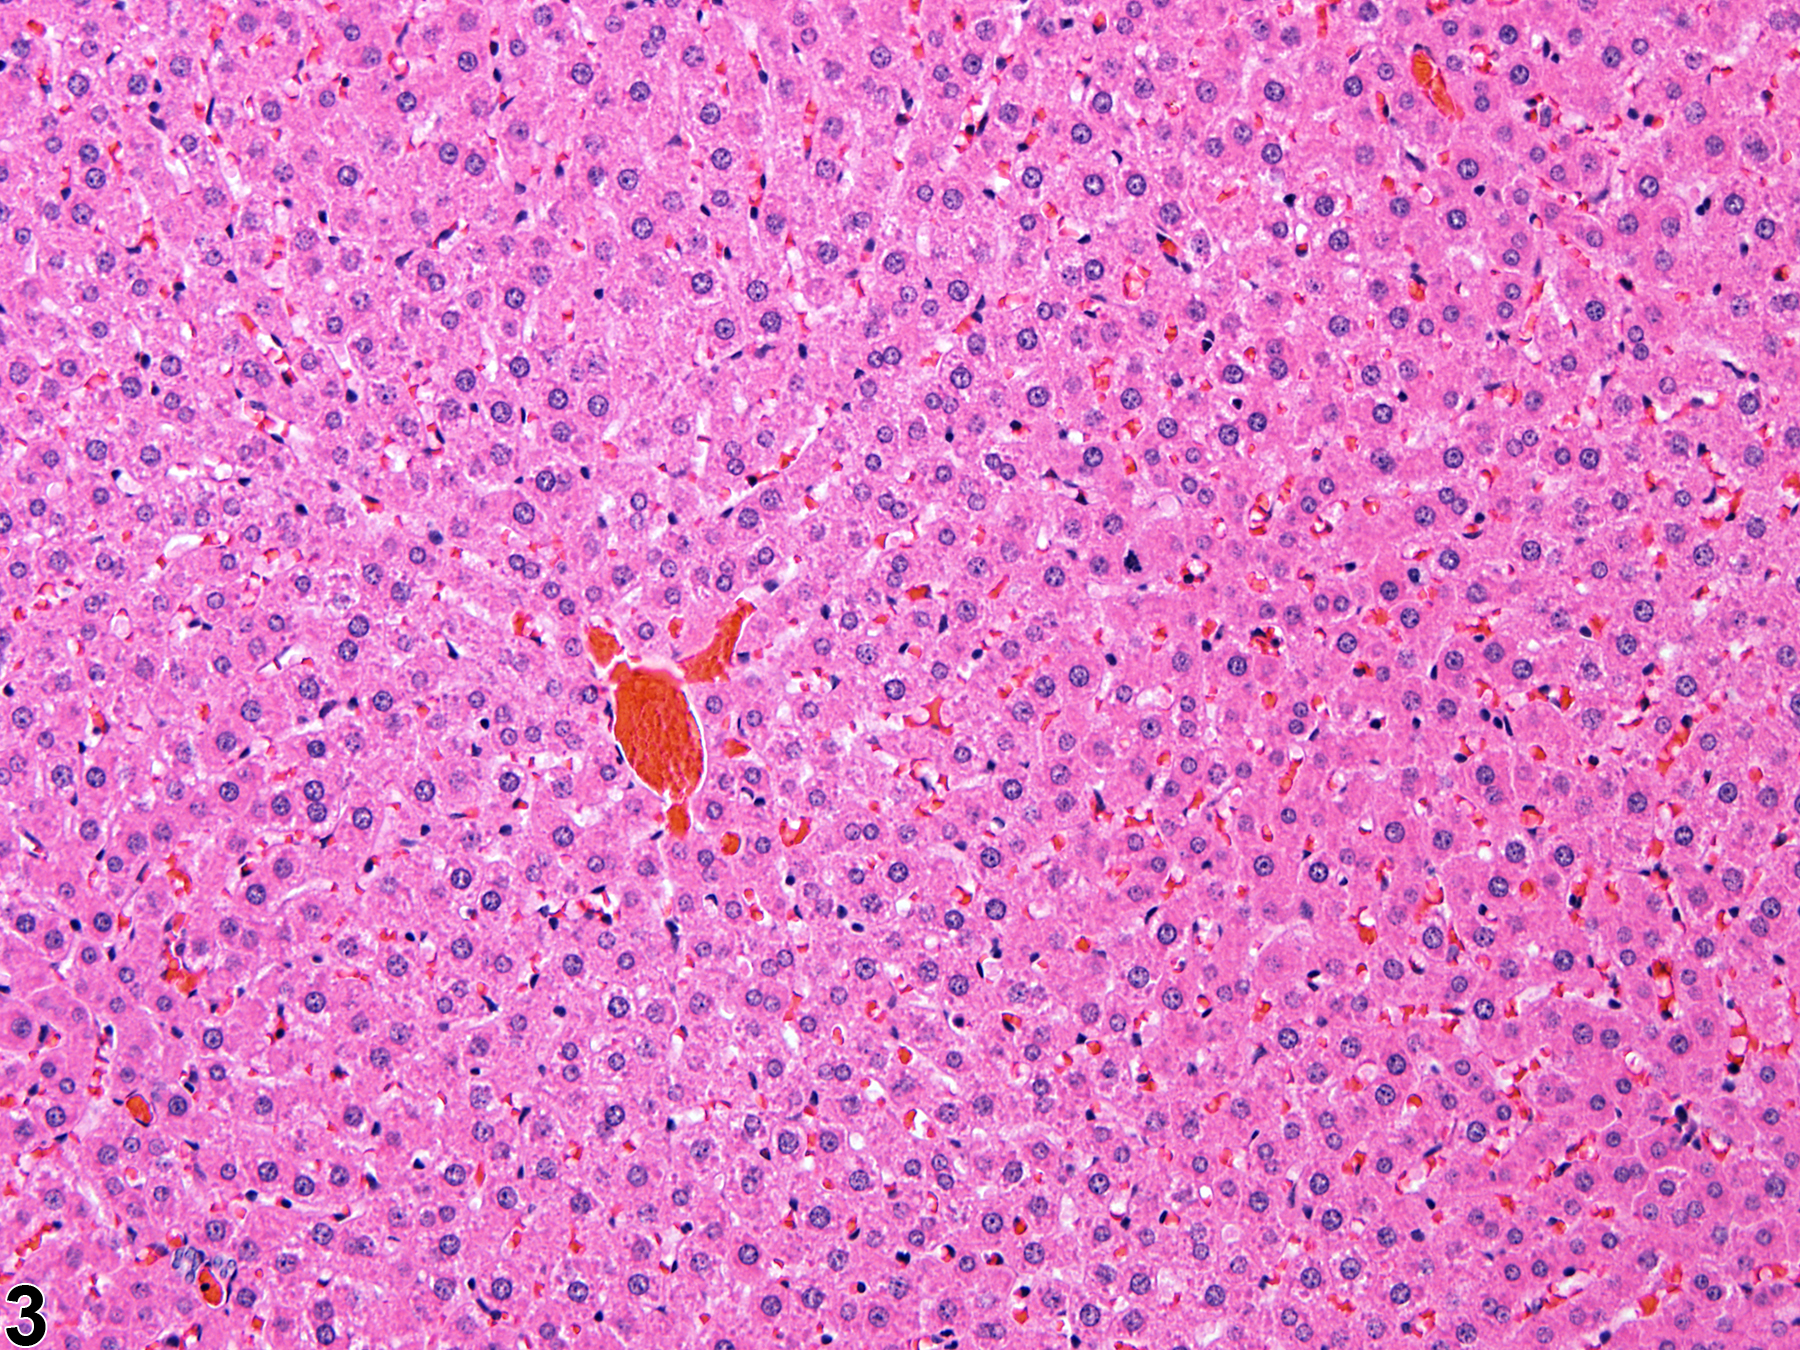 Image of atrophy (normal comparison) in the liver from a female F344/N rat in a subchronic study